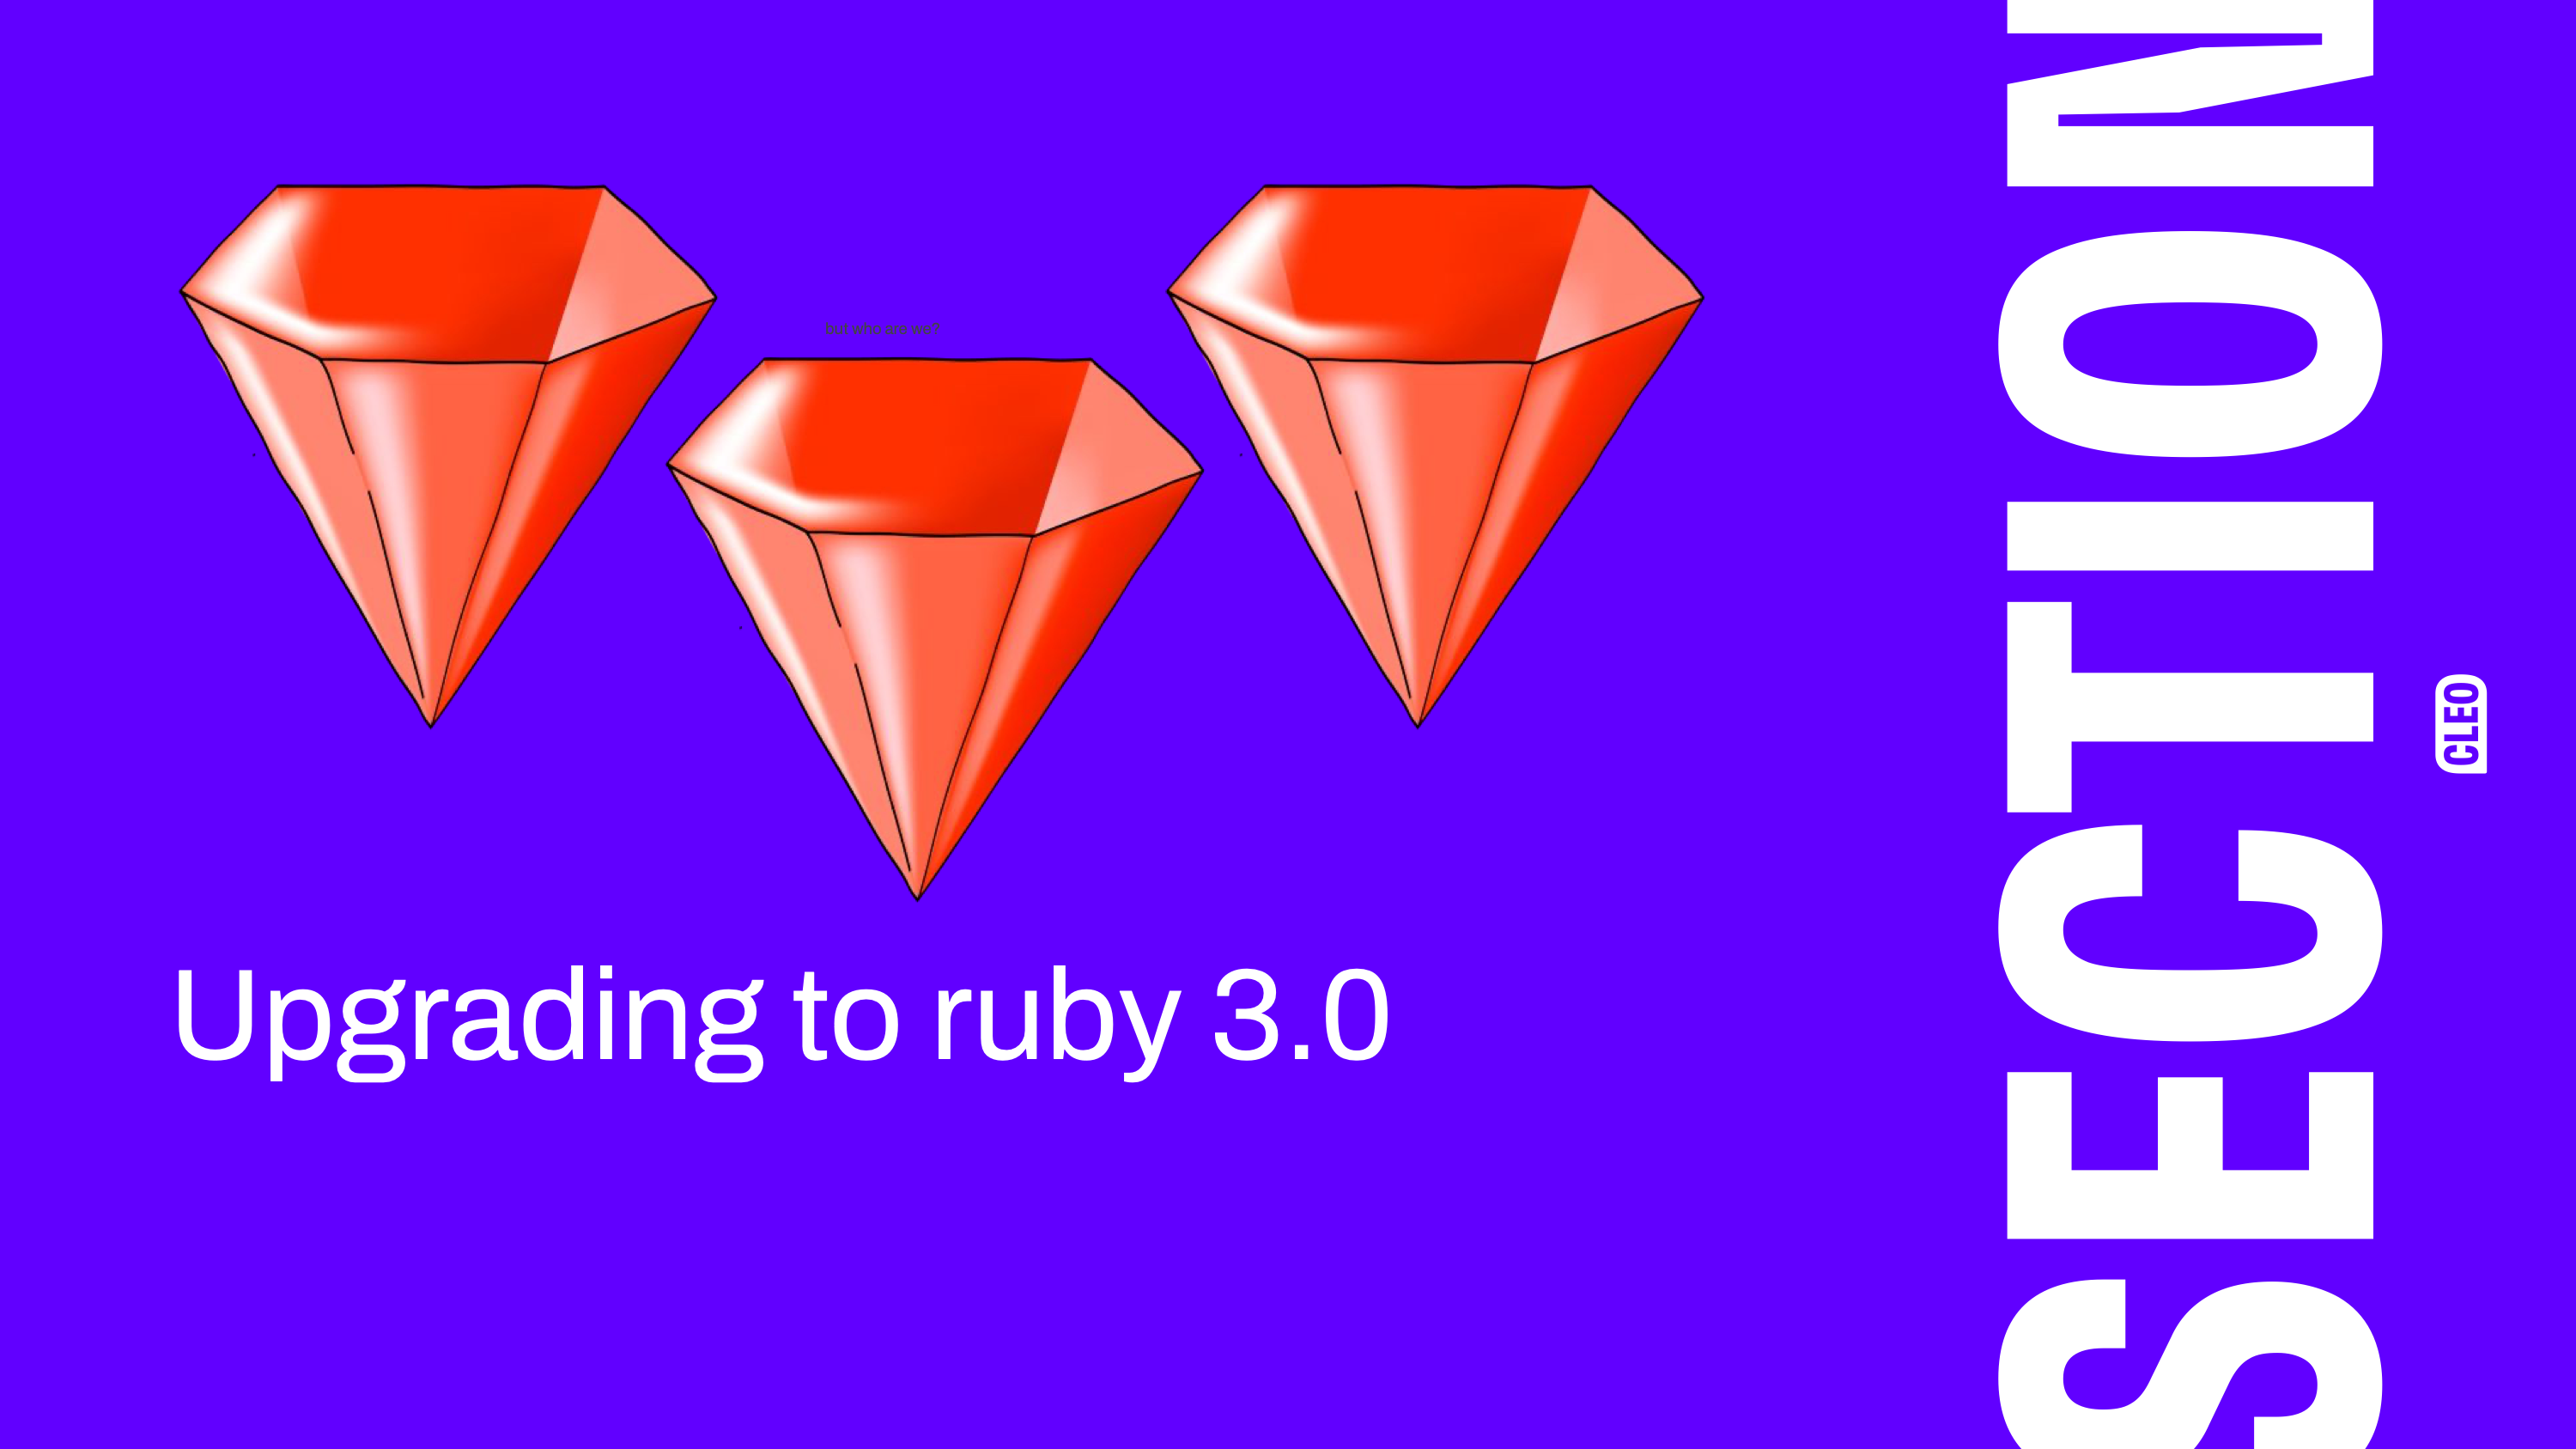 A section title for Upgrading to ruby 3.0; three large rubys float above the title; text: Upgrading to ruby 3.0